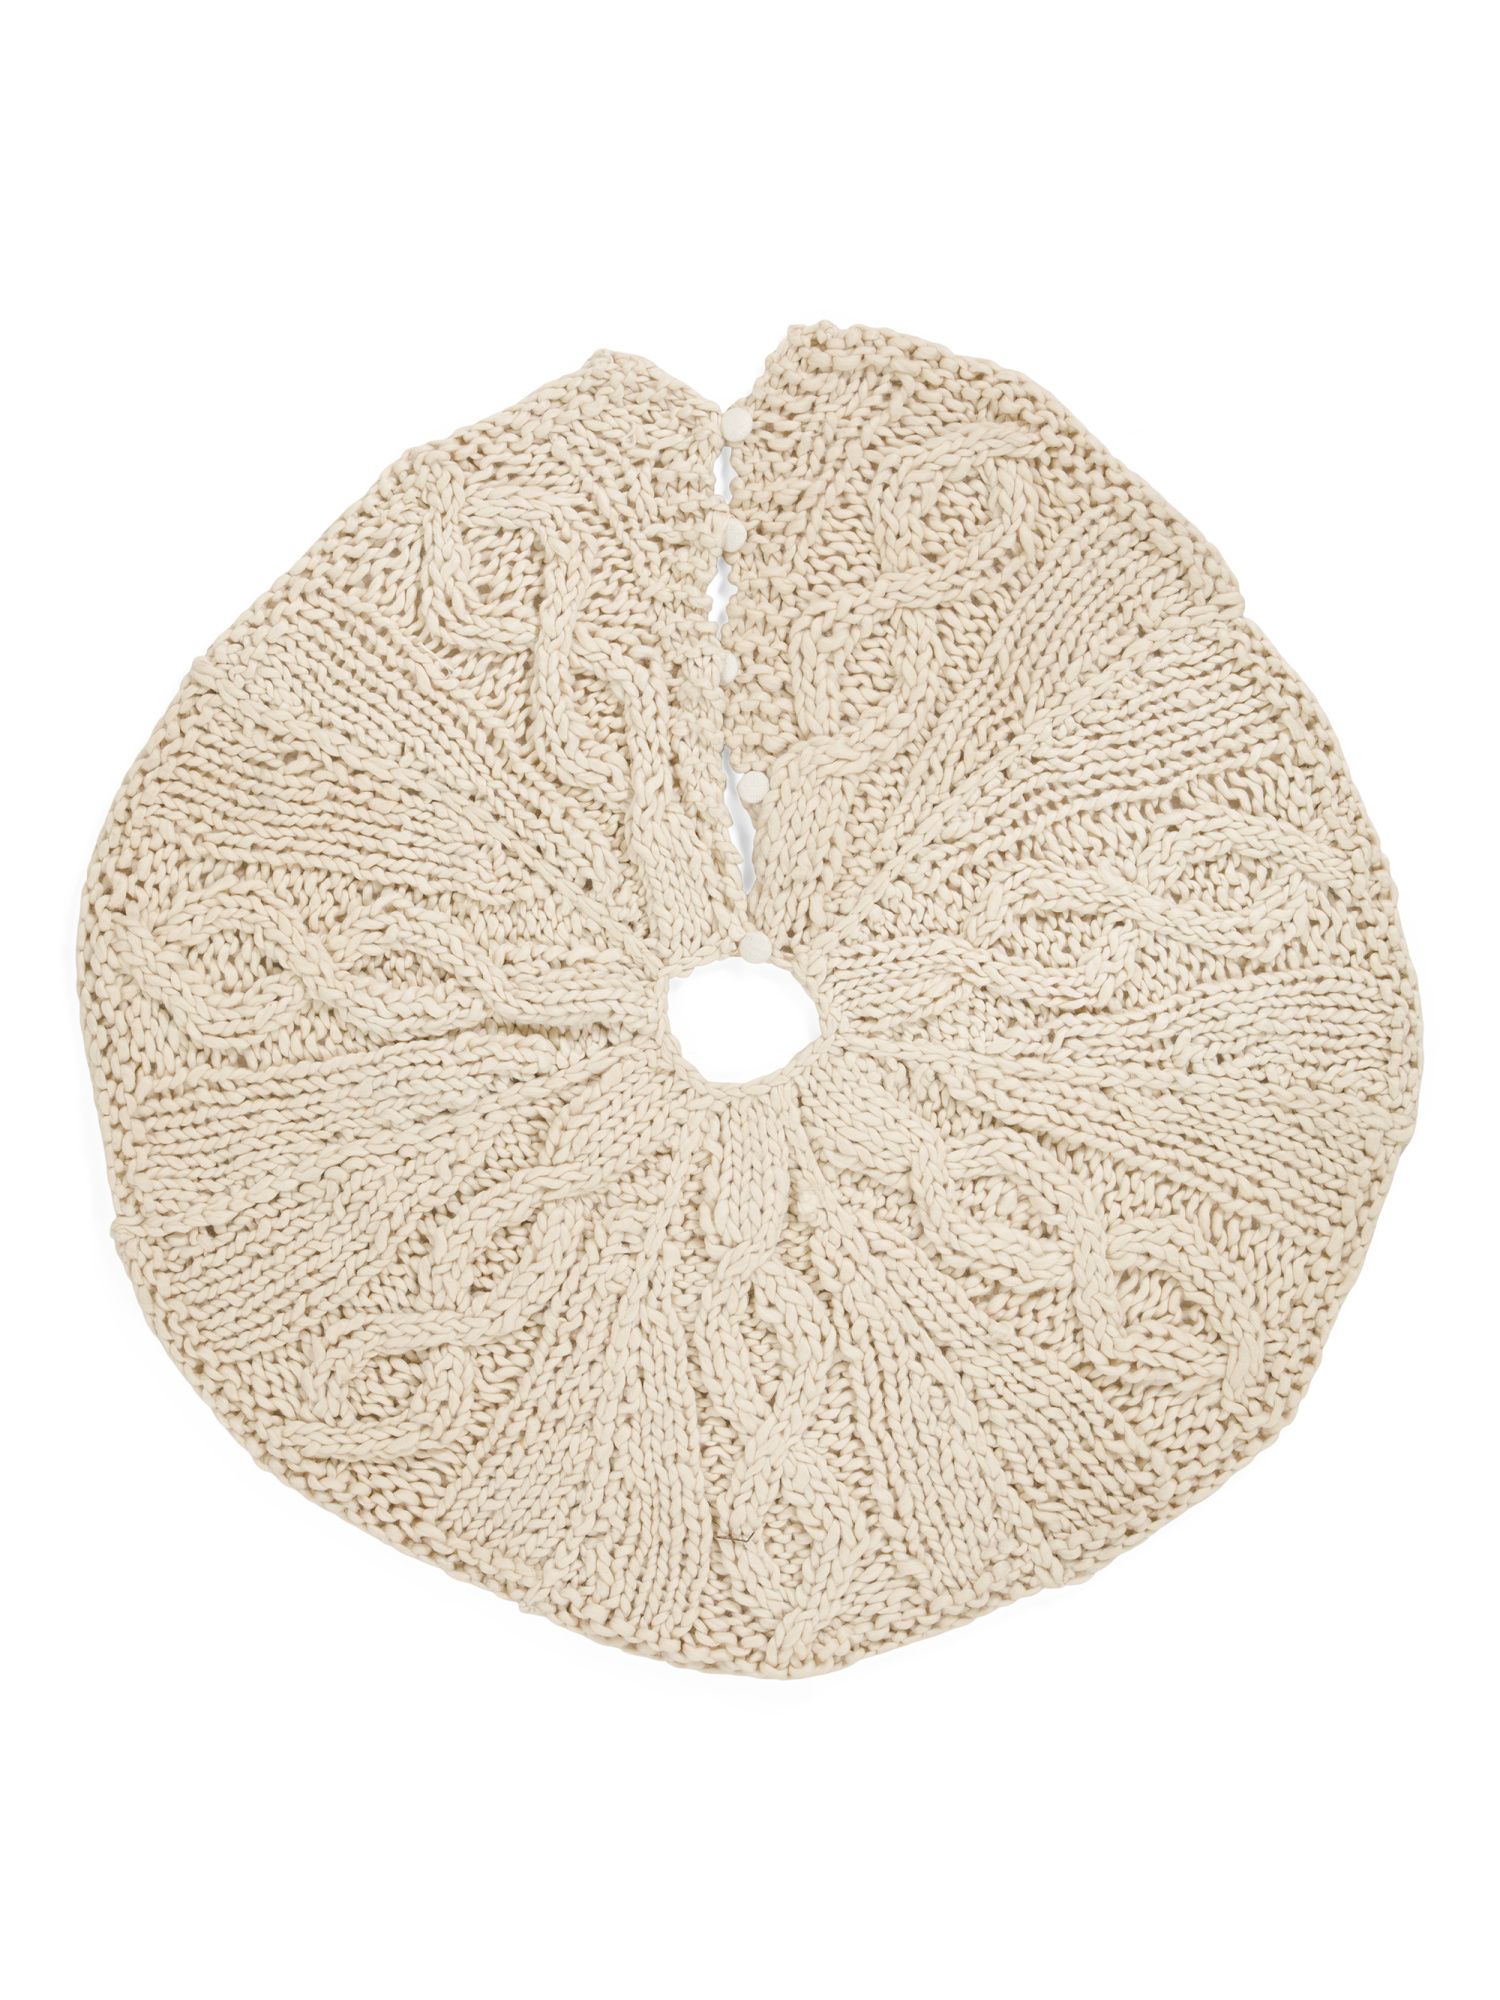 48in Chunky Cable Knit Tree Skirt | Gifts For Home | Marshalls | Marshalls